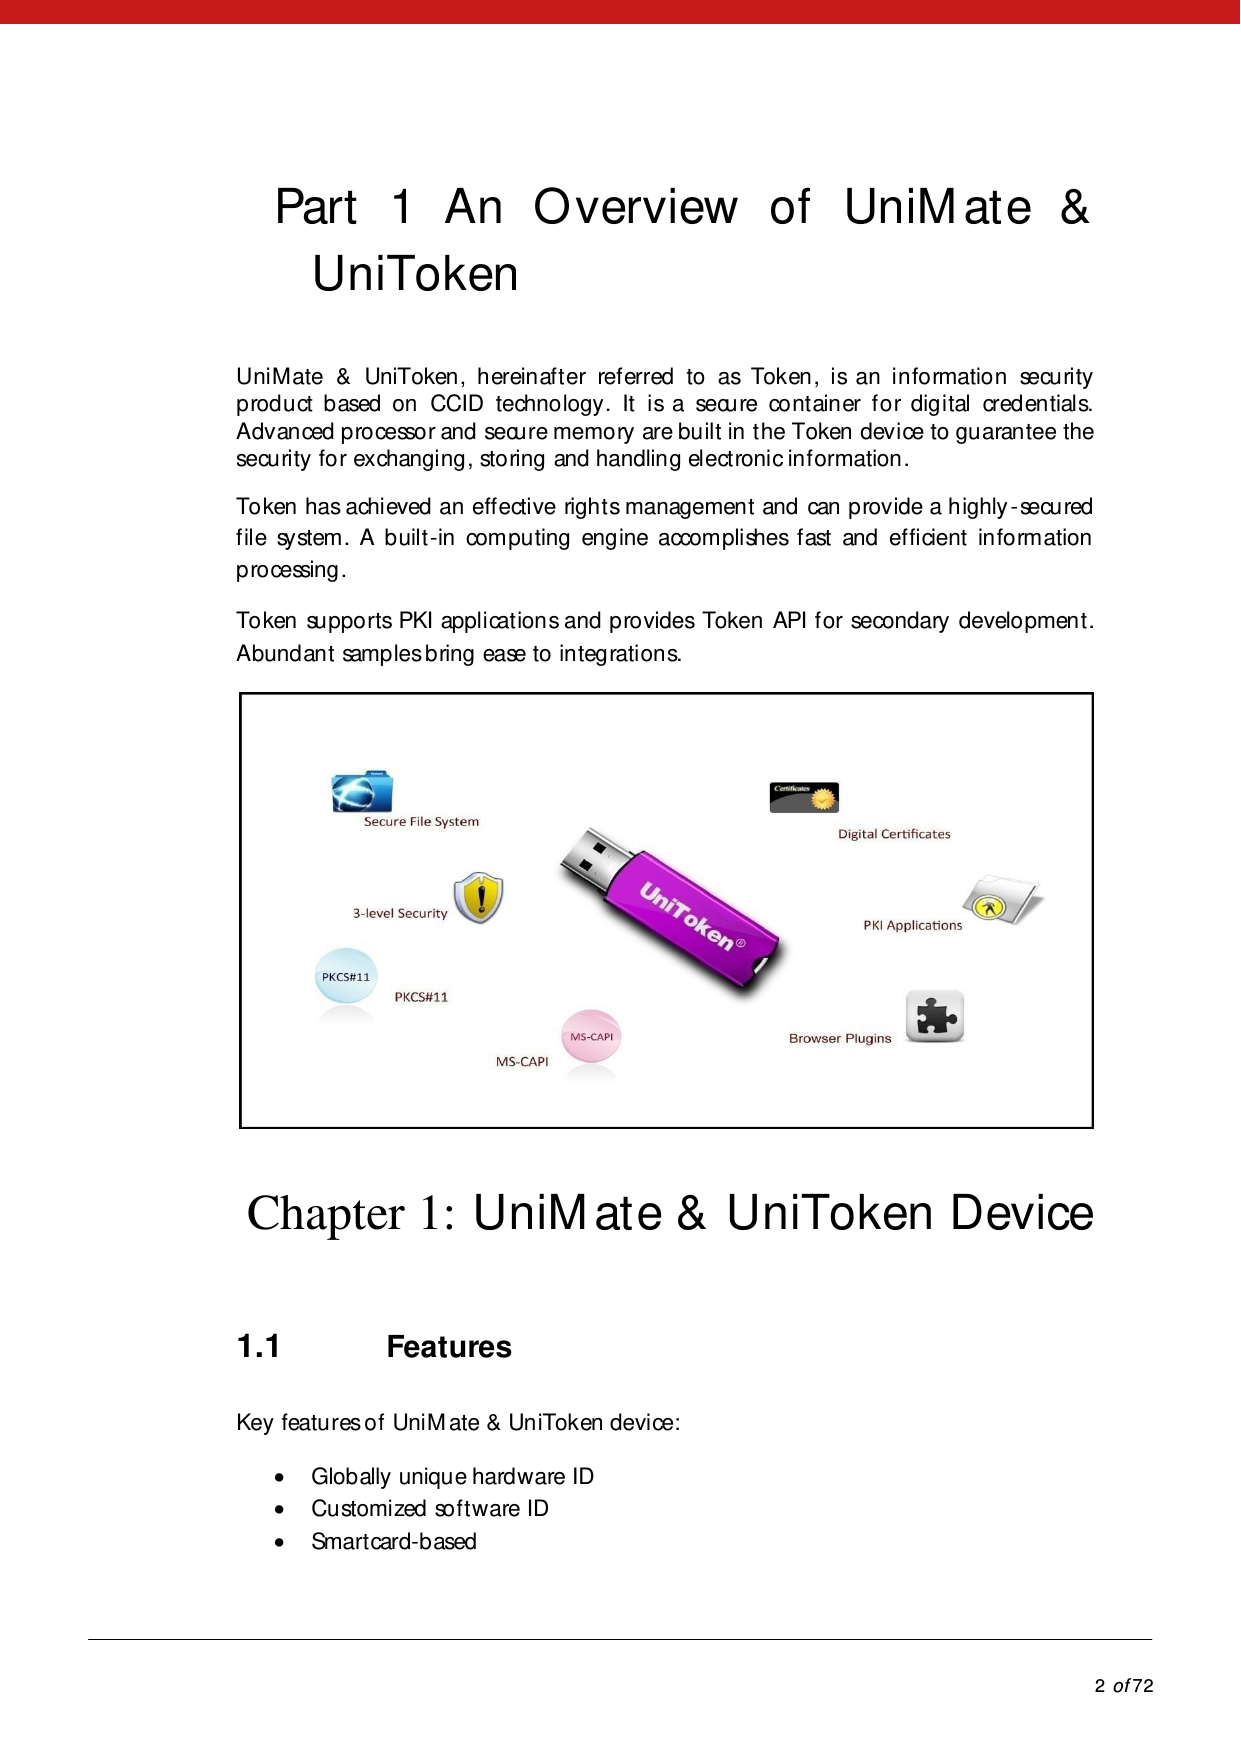            2 of 72  Part 1 An Overview of UniM ate &amp; UniToken UniMate &amp; UniToken,  h ereinafter referred to as Token,  is an  in fo rmatio n secu ri ty product based on CCID technology. It is a secure container for digital credentials. Advanced processor and secure memory are built in the Token device to guarantee the secu ri ty  fo r ex changing , sto ring and handling electronic information. Token has achieved an effective rights management and can provide a highly -secu red file system. A built-in computing engine accomplishes fast and efficient information processing. Token supports PKI applications and provides  Token  API for secondary development. Abundant samples bring ease to integrations.  Chapter 1: UniM ate &amp; UniToken Device 1.1 Features Key features of UniM ate &amp;  UniToken device:  Globally unique hardware ID  Customized software ID  Smartcard-based 